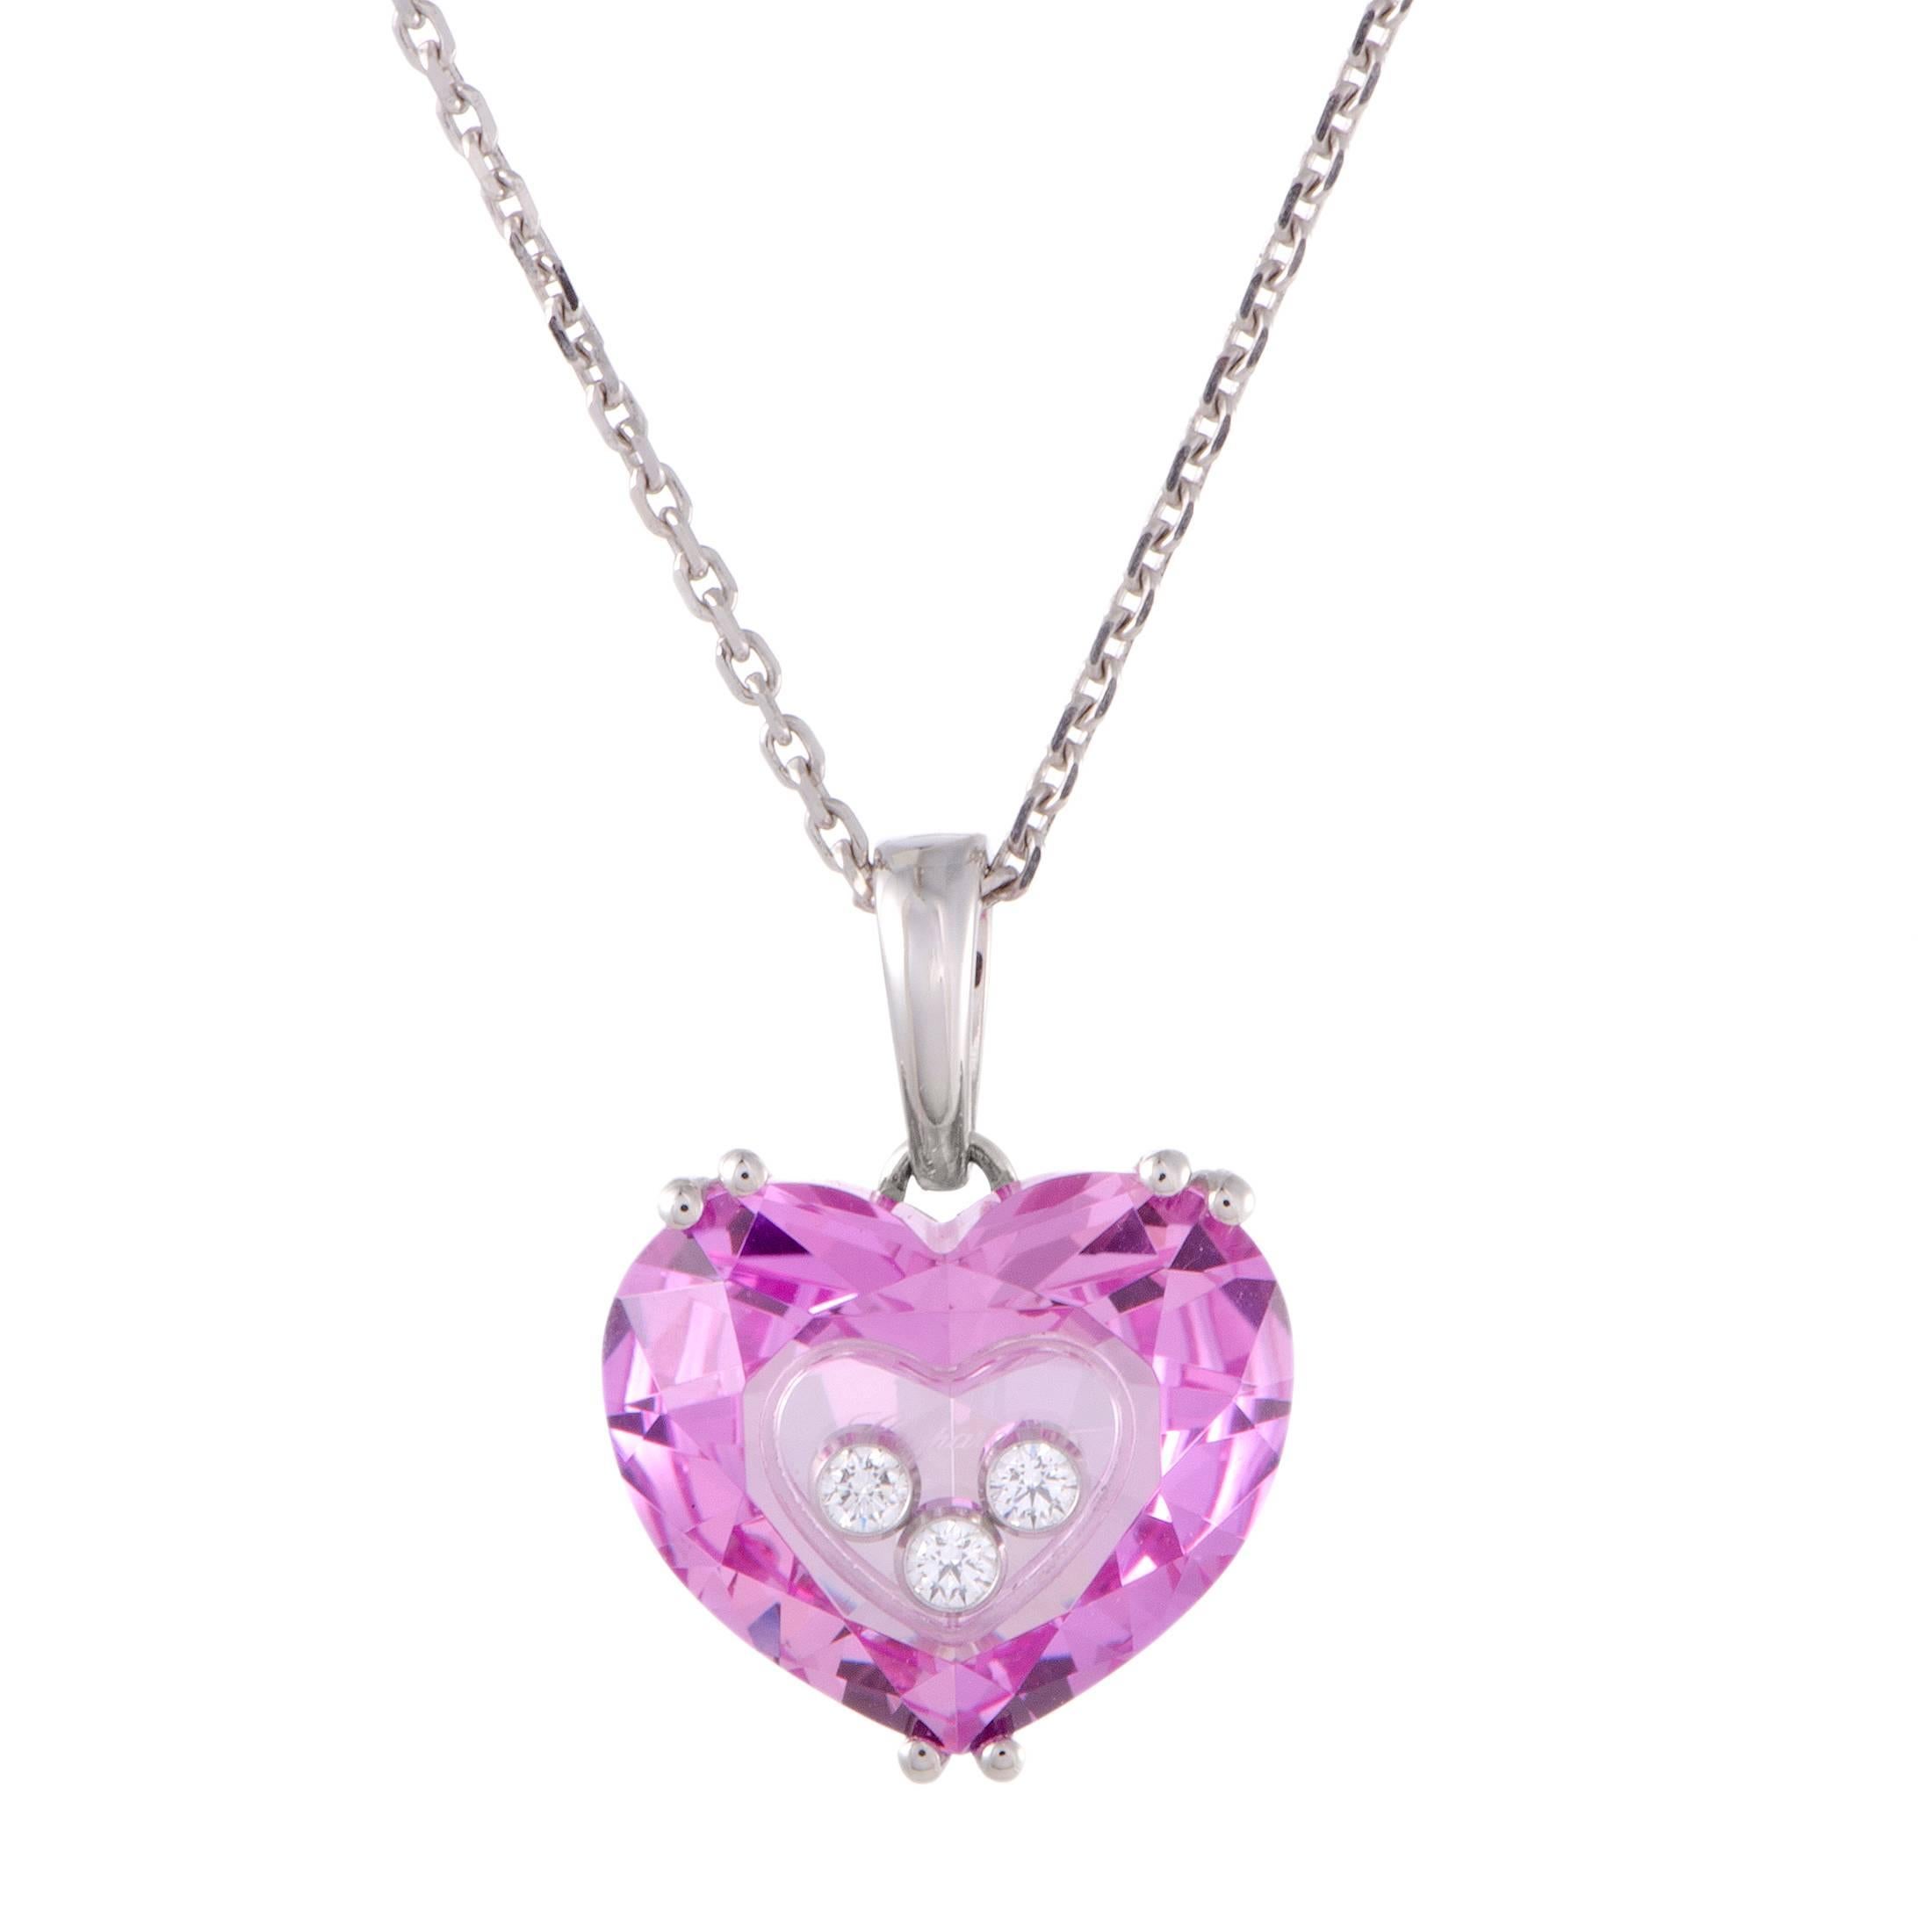 Chopard So Happy Floating Diamonds and Pink Crystal Heart Gold Pendant Necklace